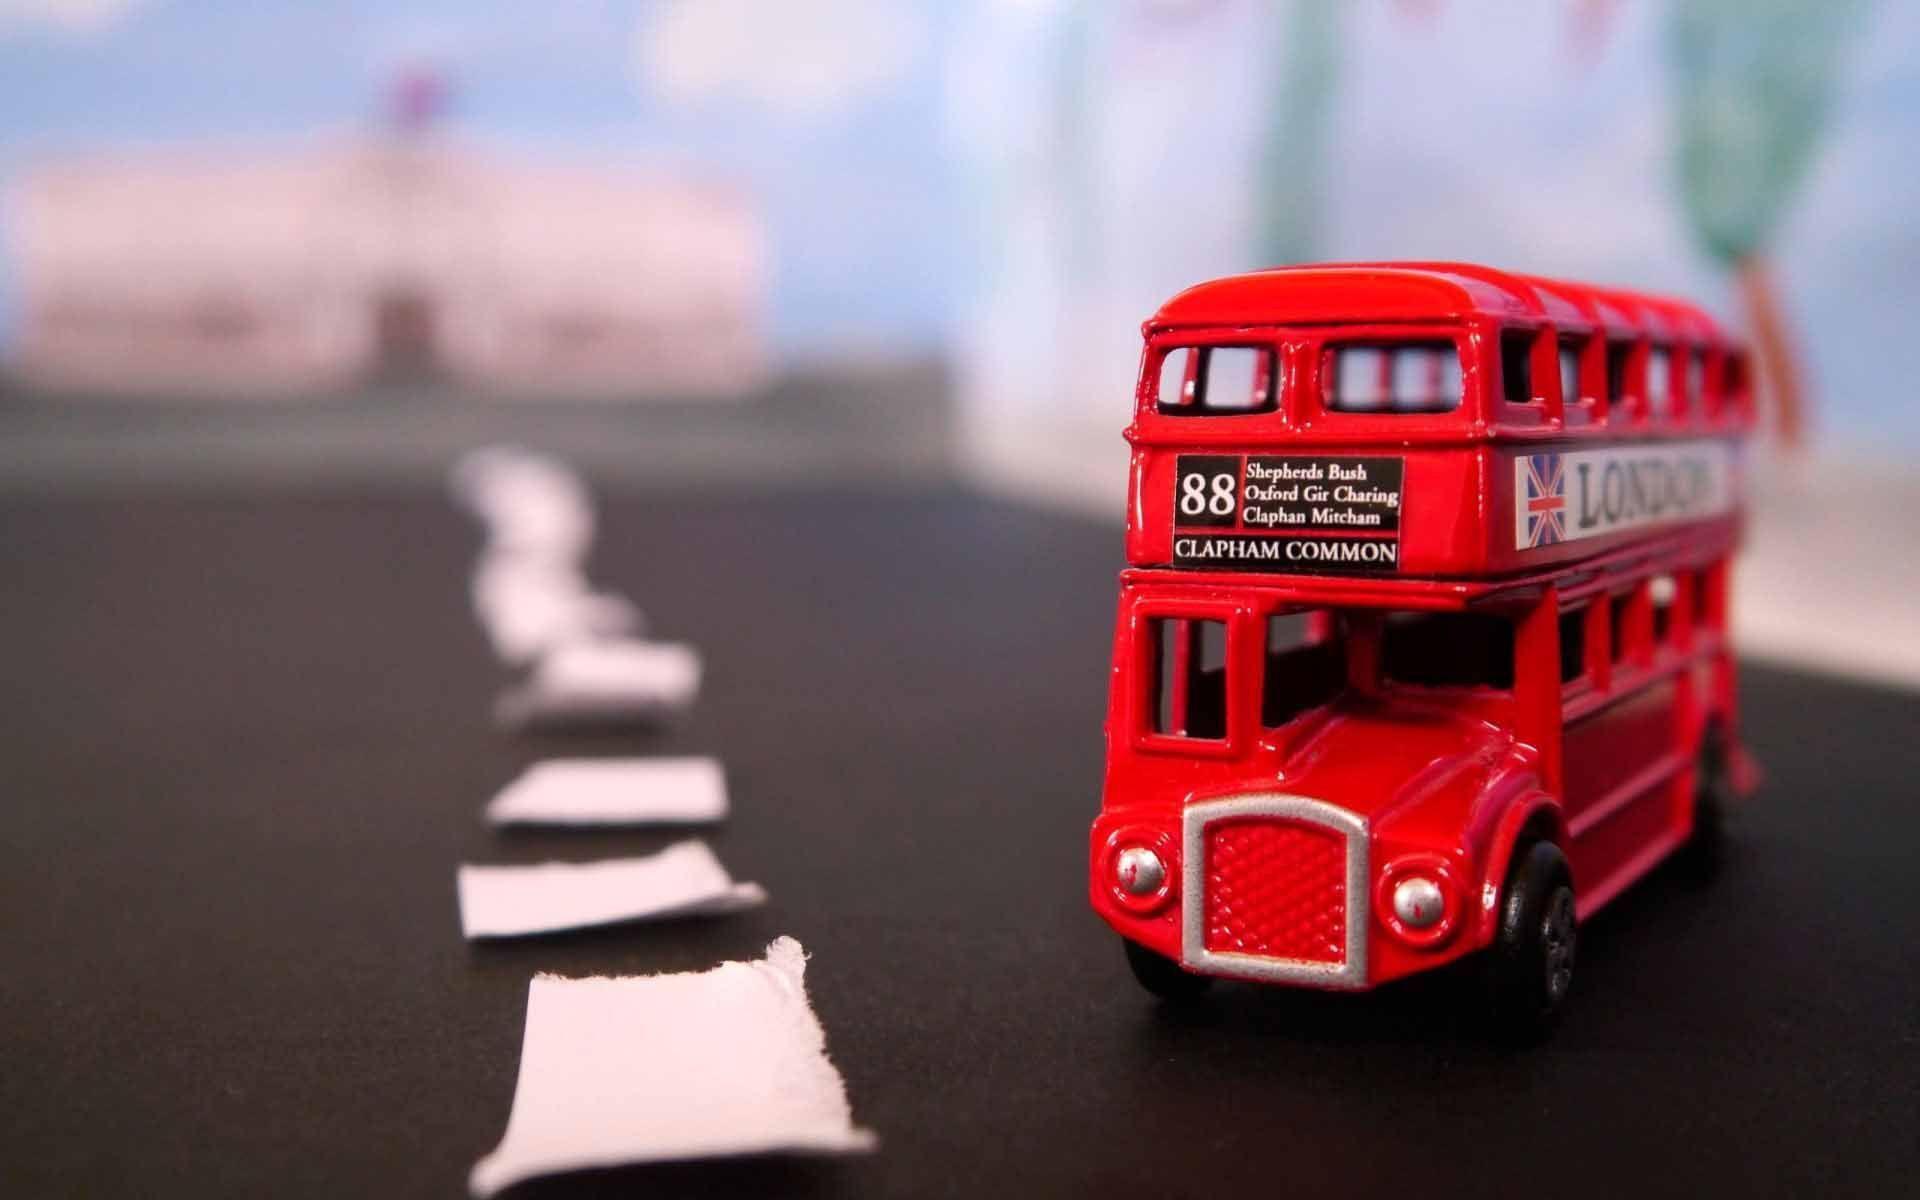 Bus Uk London Wallpaper. HD 3D and Abstract Wallpaper for Mobile